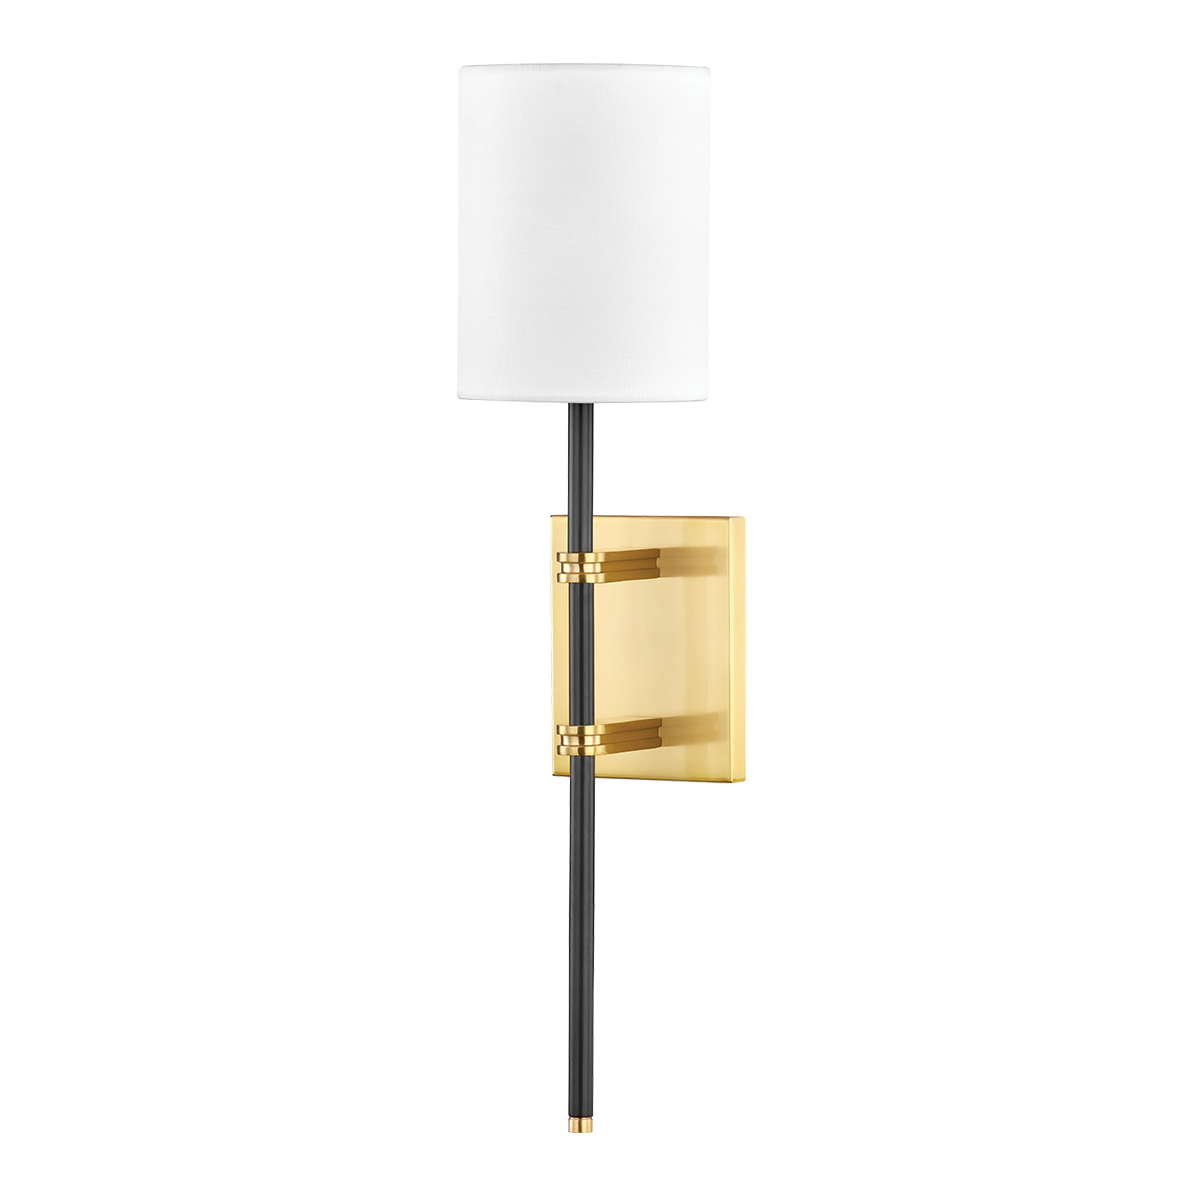 Denise 1 Light Wall Sconce-Mitzi-HVL-H547101-AOB-Outdoor Wall SconcesAged Old Bronze-1-France and Son